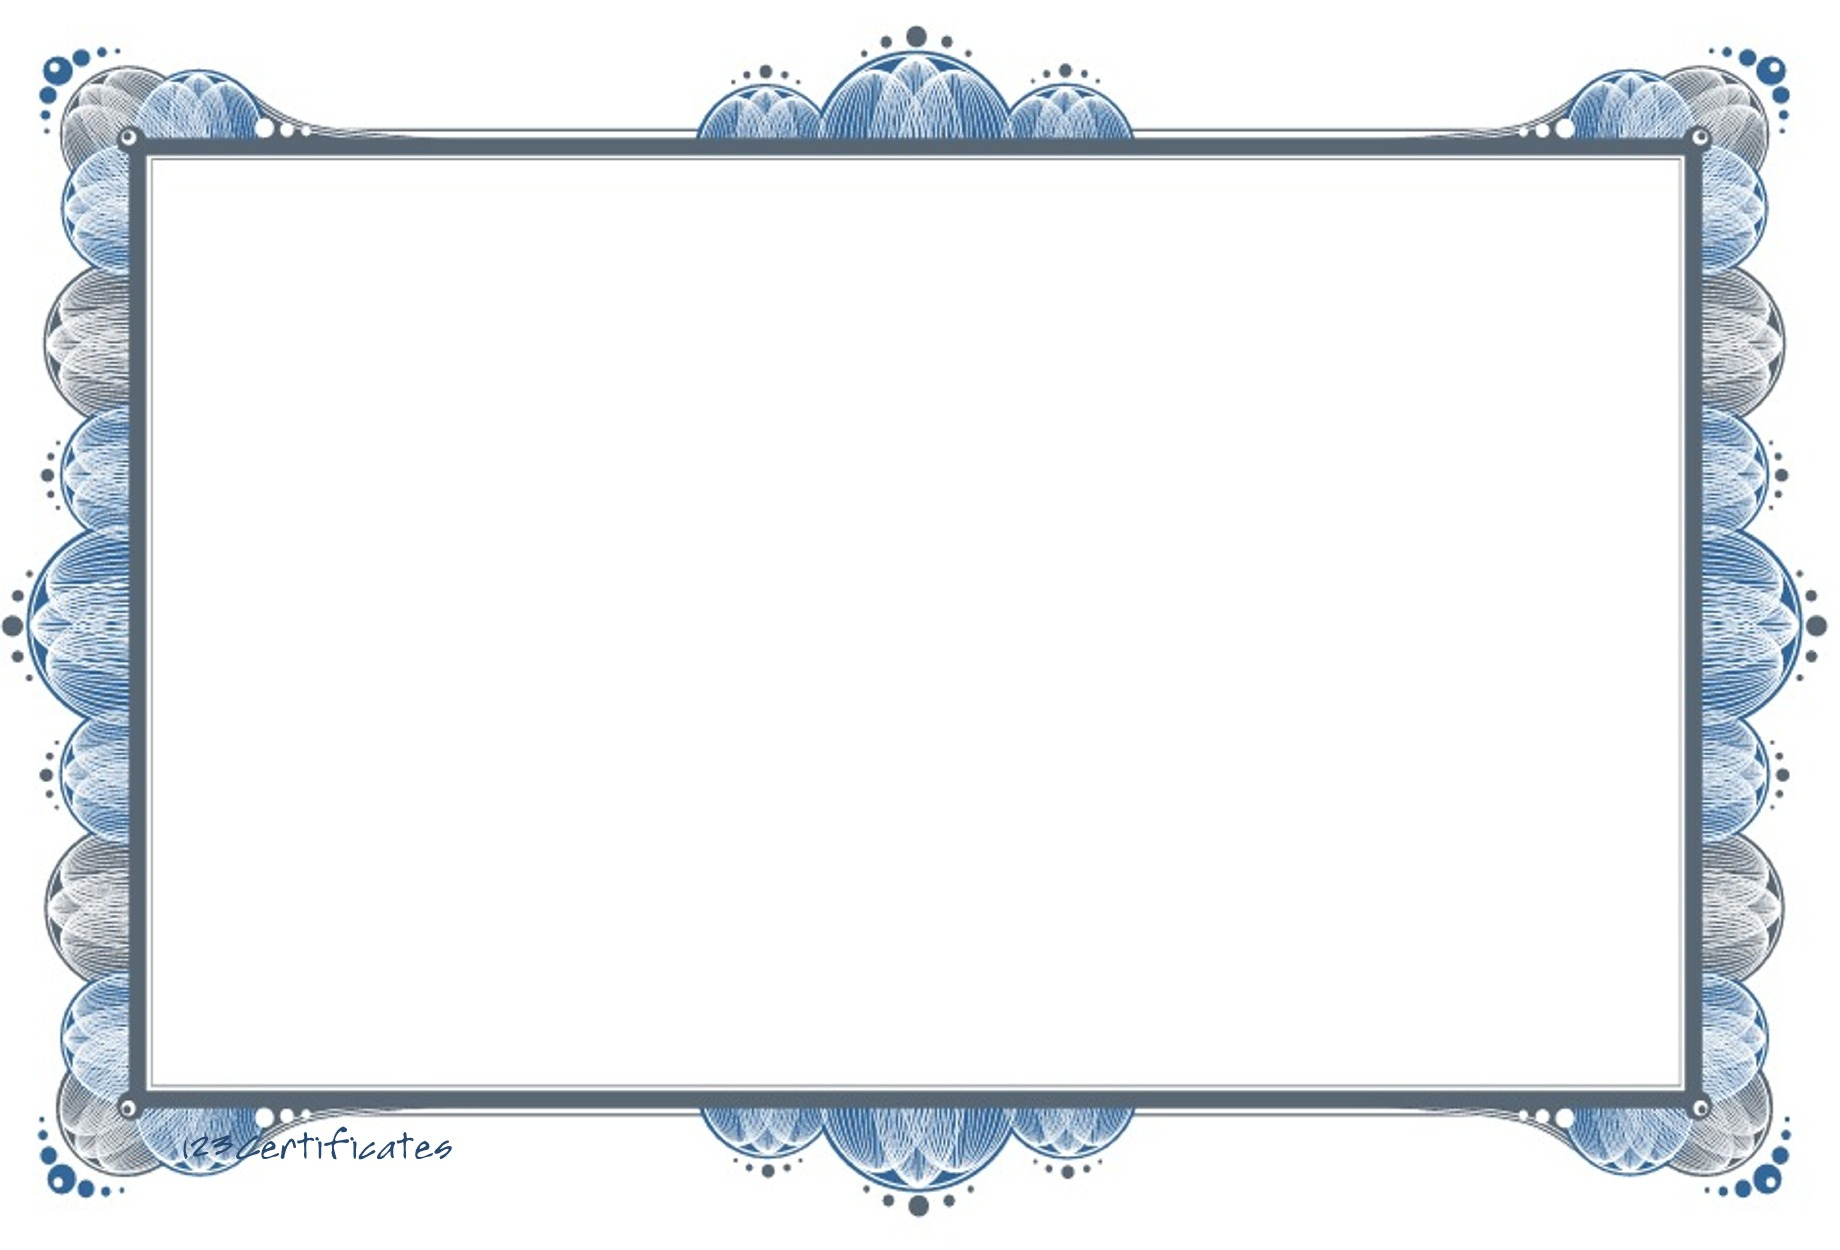 Free Certificate Border, Download Free Clip Art, Free Clip Pertaining To Free Printable Certificate Border Templates